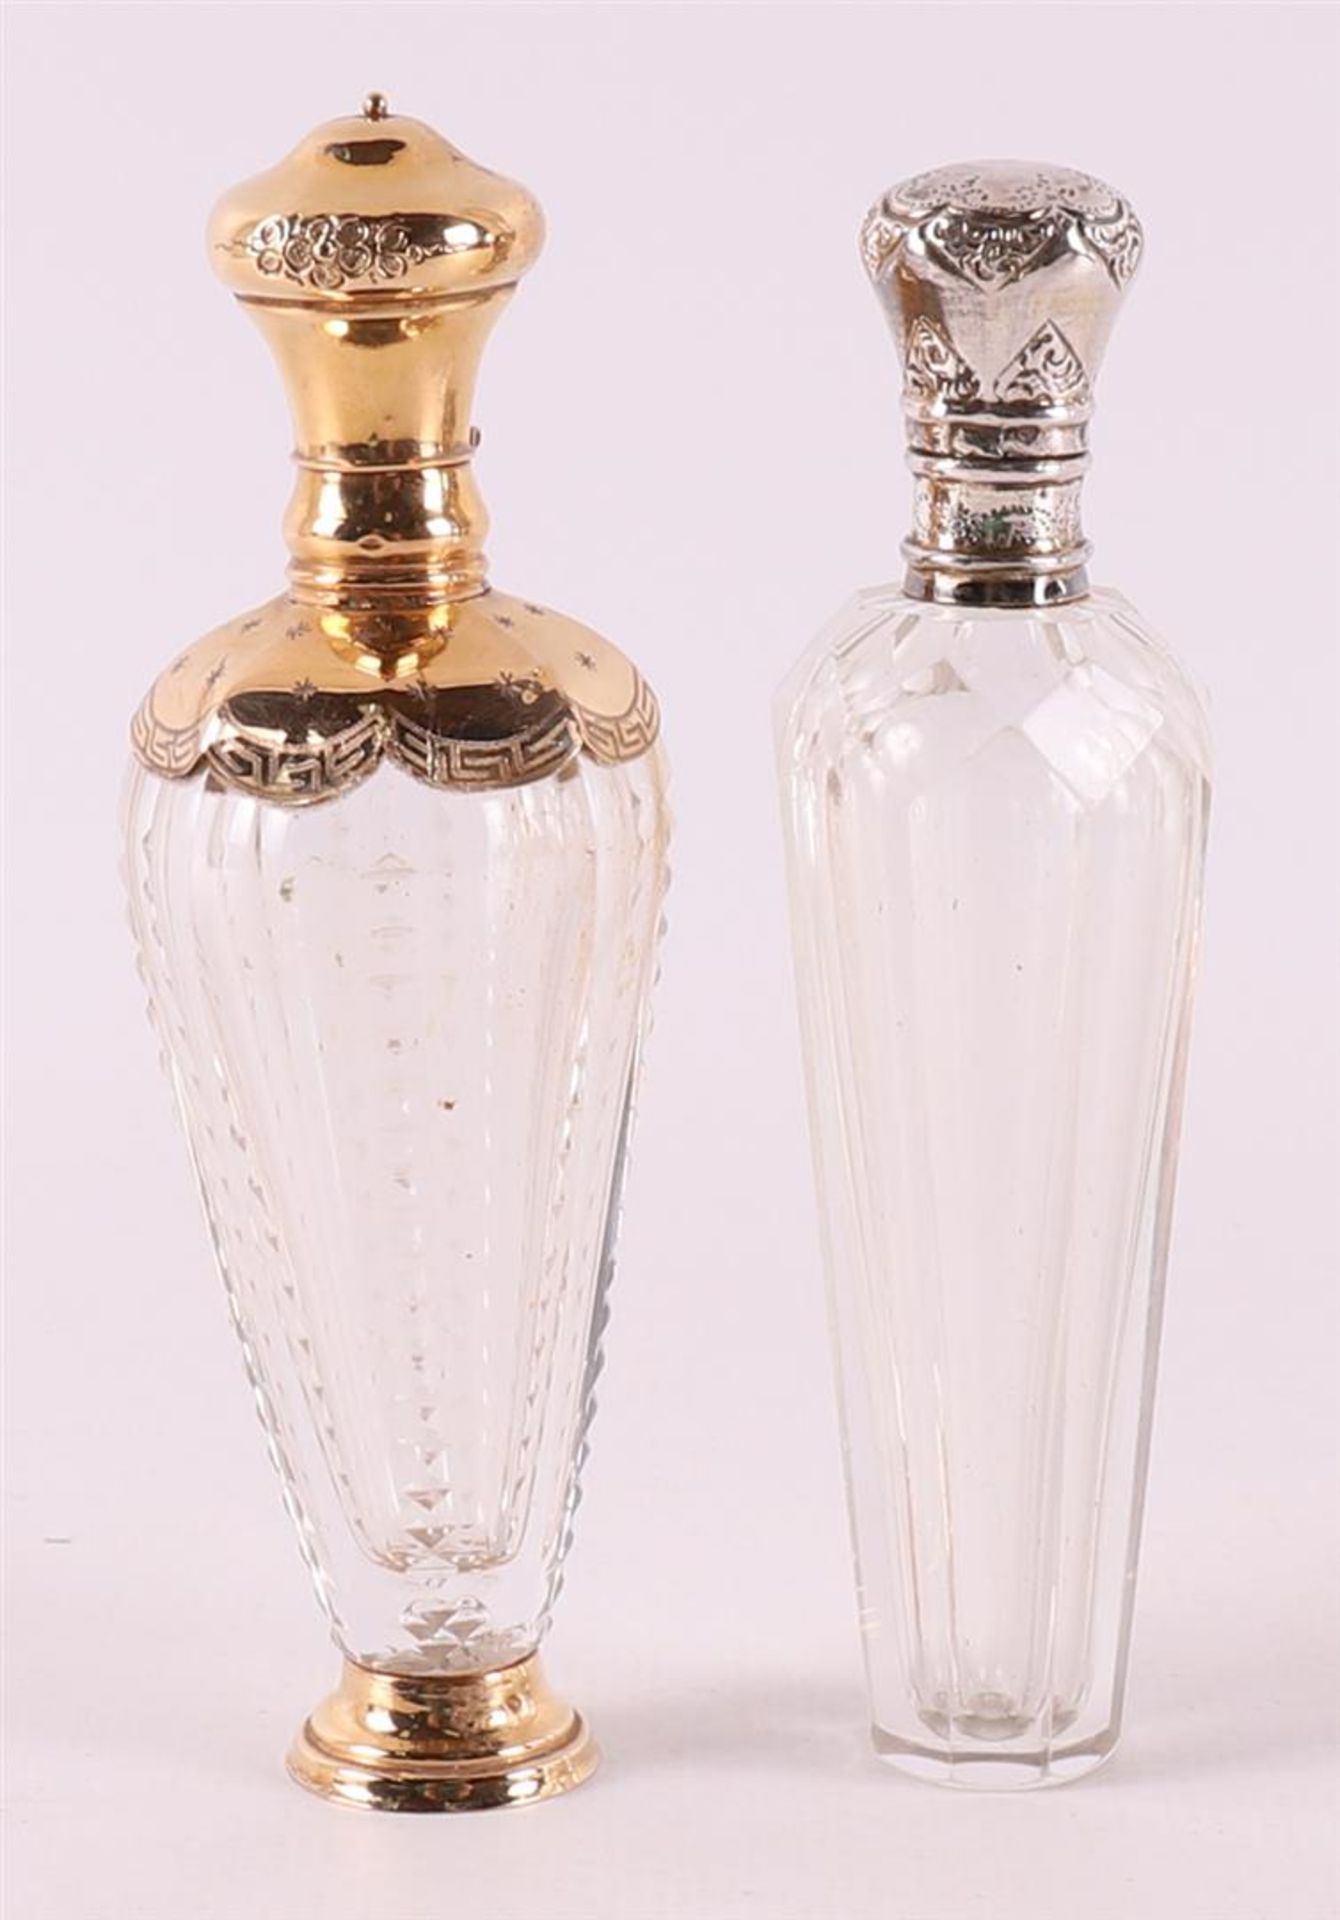 A clear crystal odor flask with gold lid and frame, around 1900.